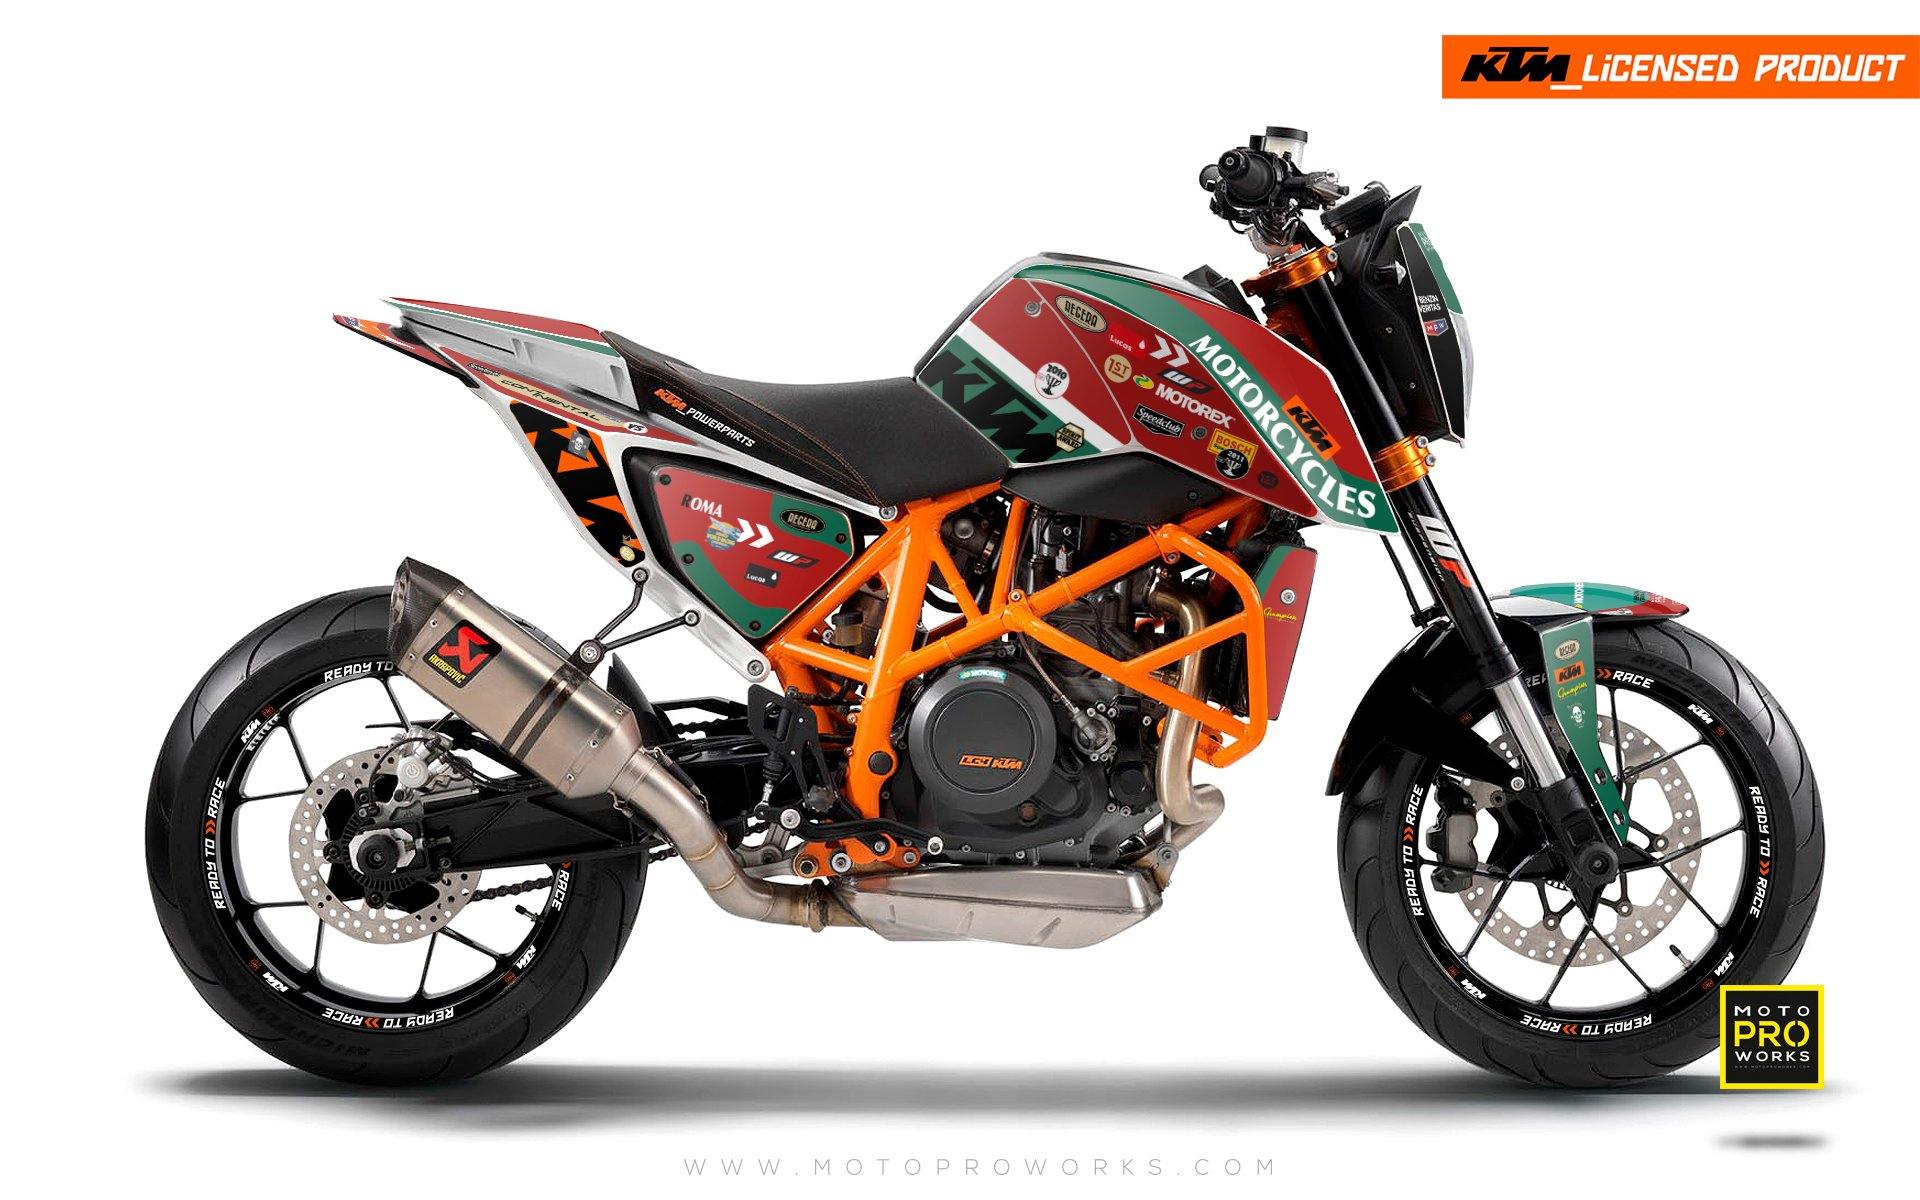 KTM 690 Duke GRAPHIC KIT - "Regera" (Red/Green) - MotoProWorks | Decals and Bike Graphic kit